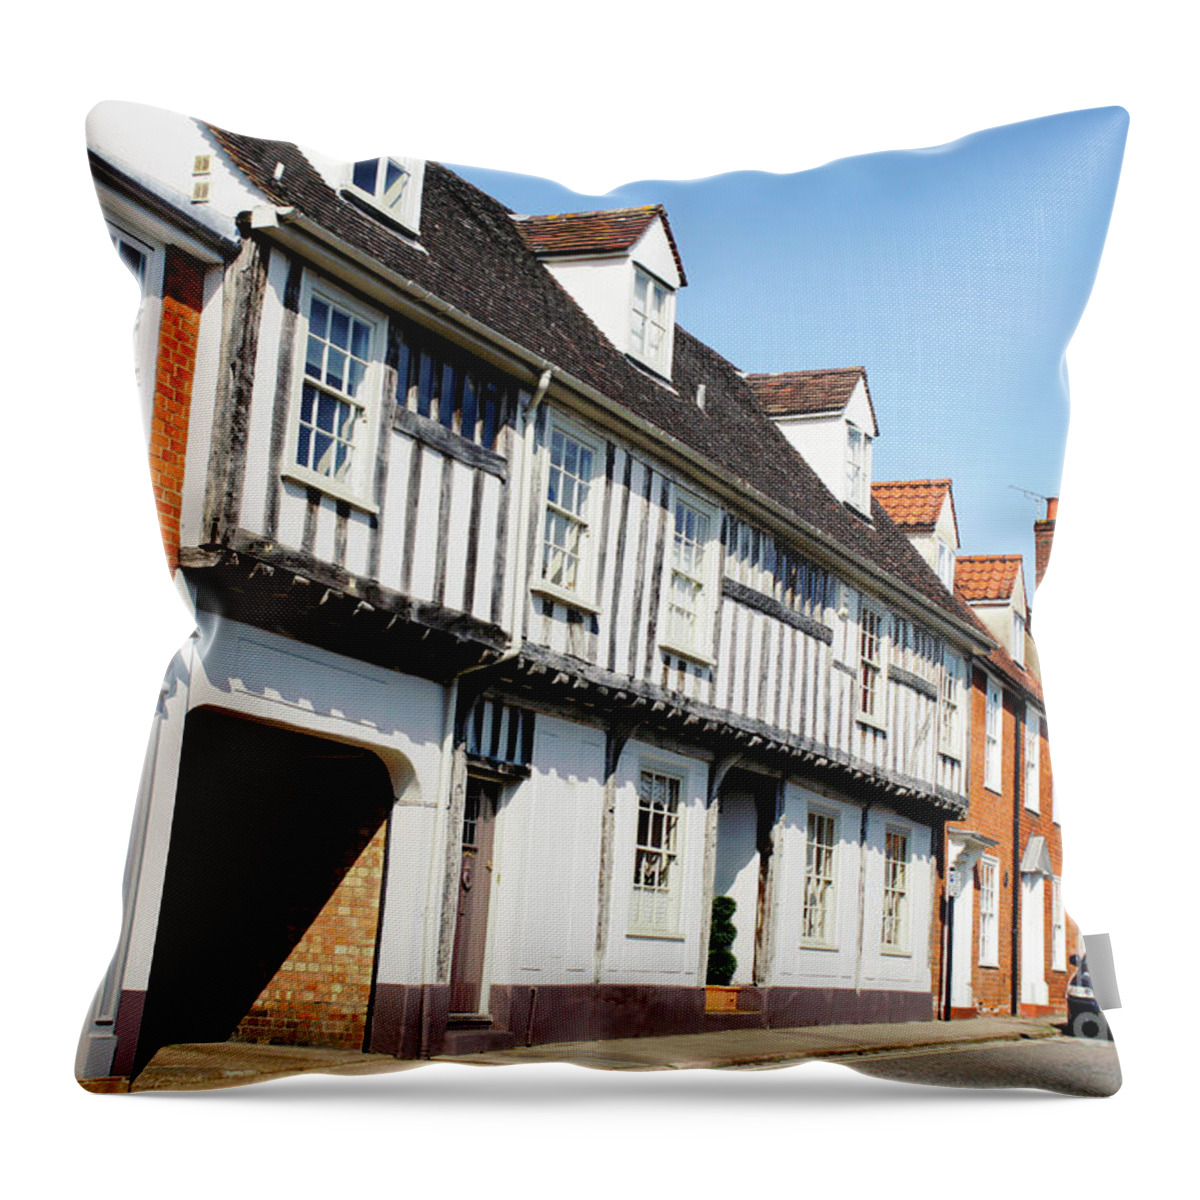 Architecture Throw Pillow featuring the photograph Bury St Edmunds houses #2 by Tom Gowanlock